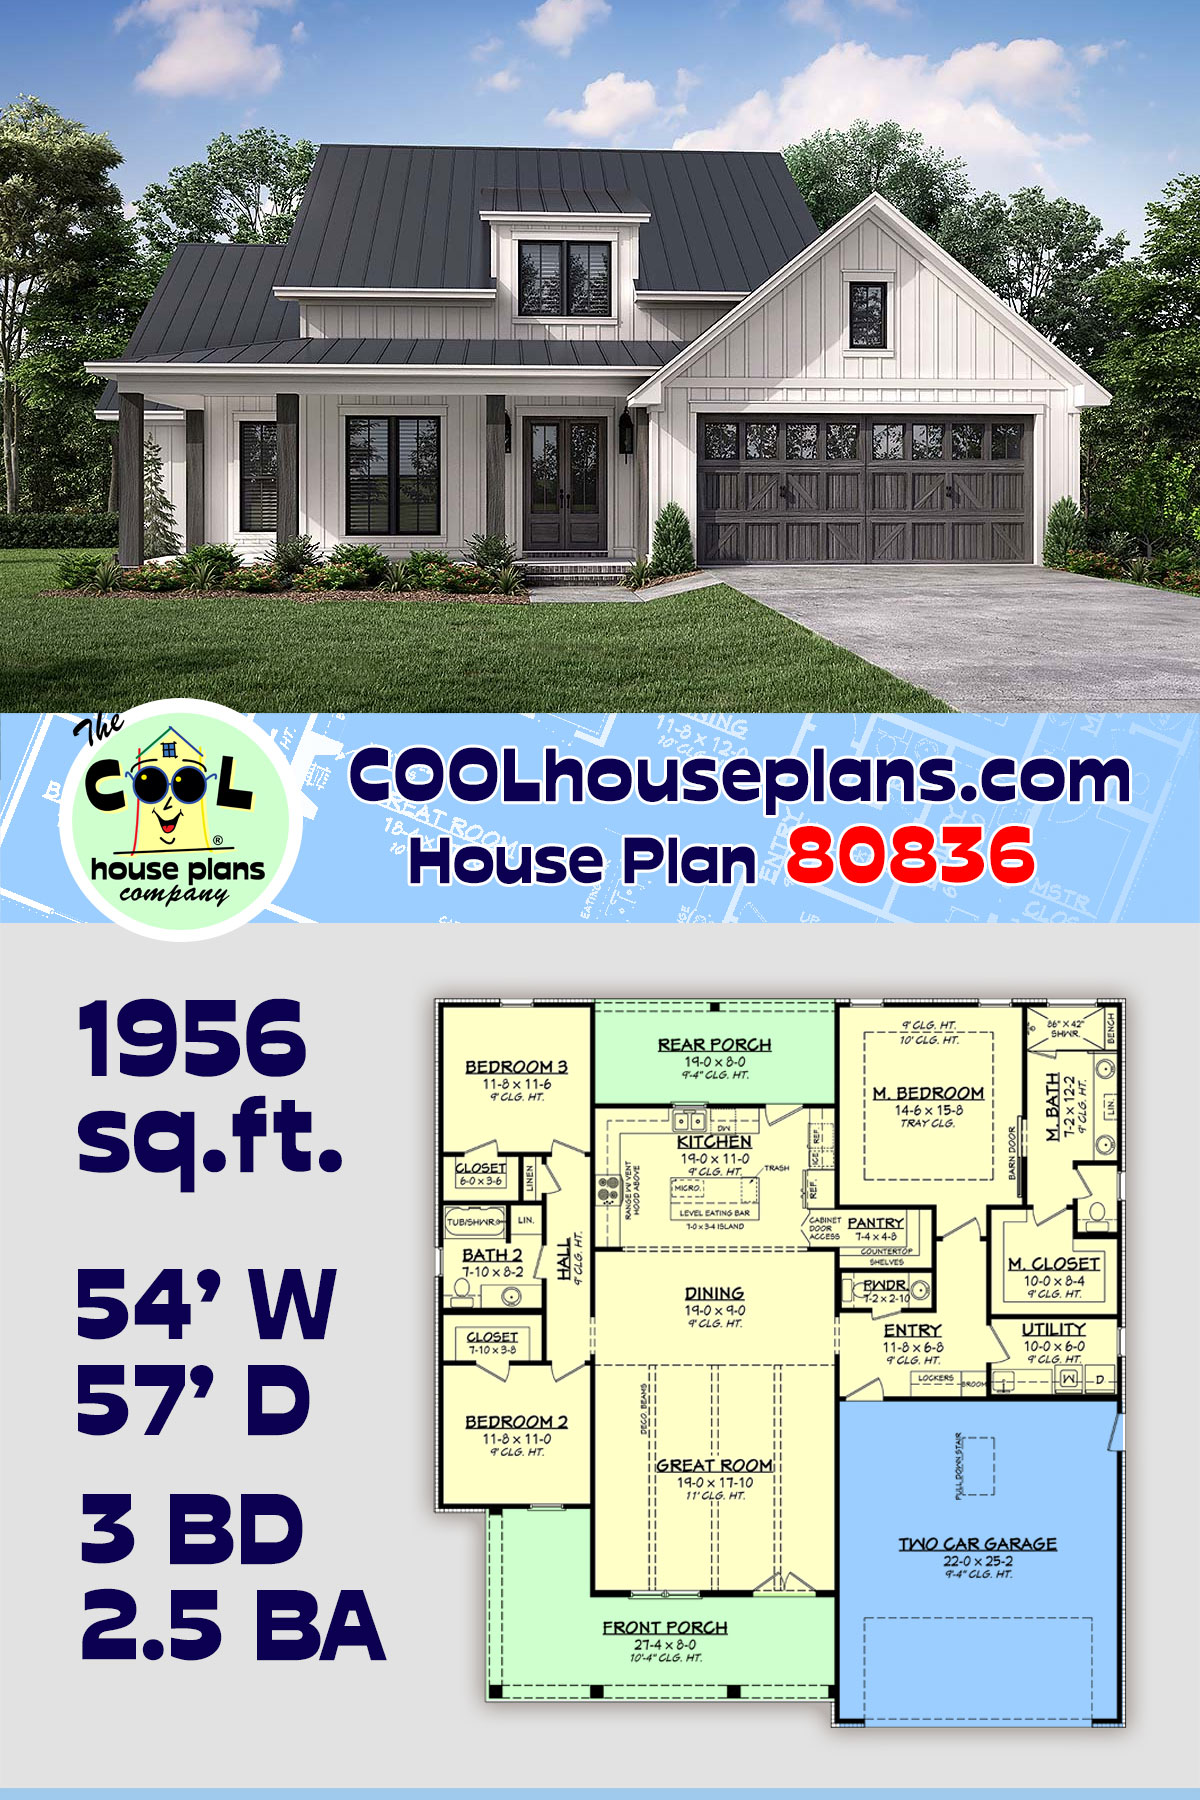 Country, Craftsman, Farmhouse, Traditional House Plan 80836 with 3 Beds, 3 Baths, 2 Car Garage